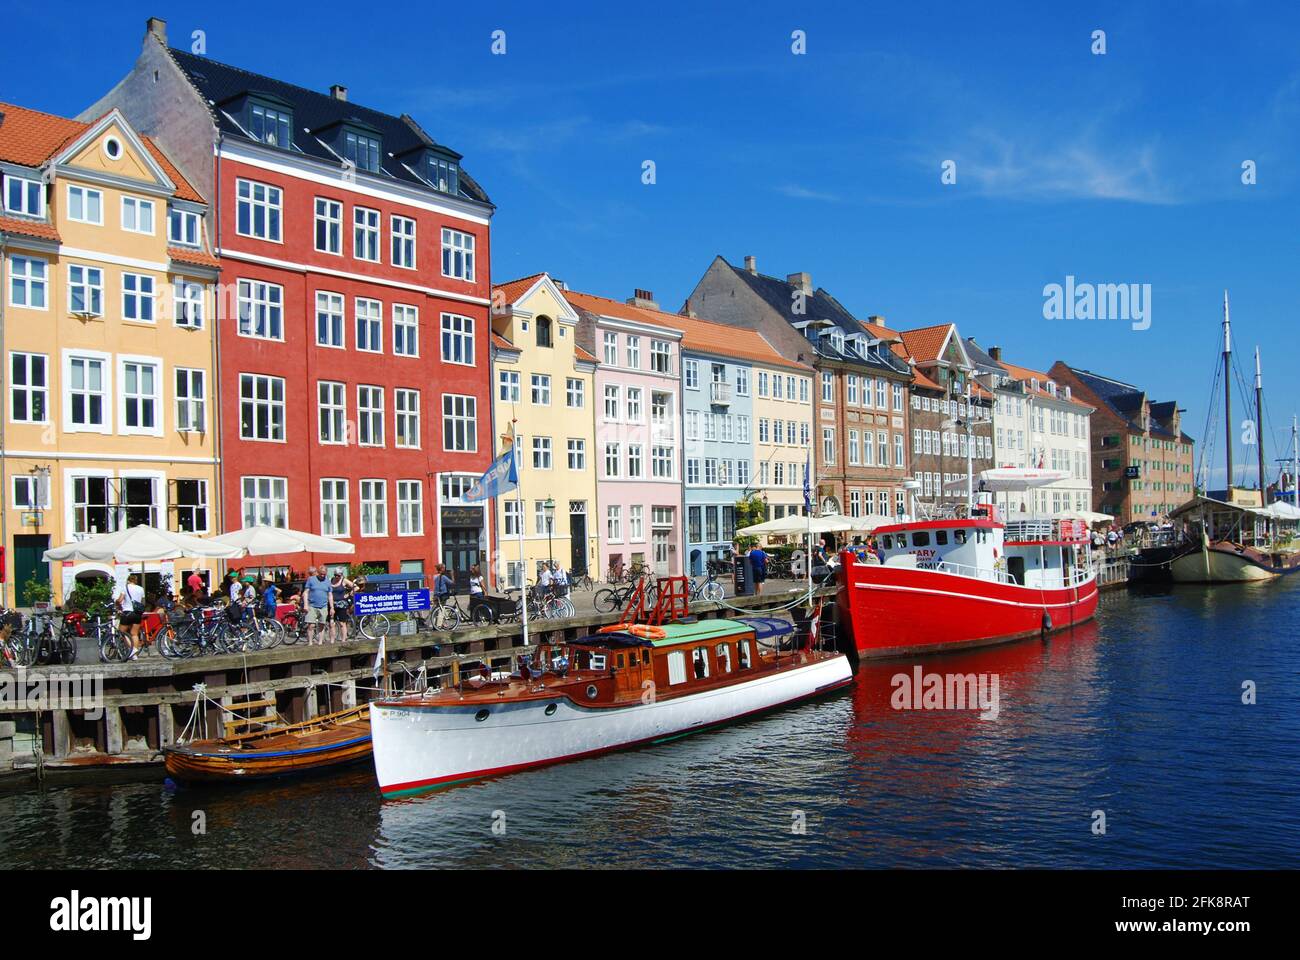 Copenhagen, Denmark. - Along the canals with the characteristic colored houses. Stock Photo